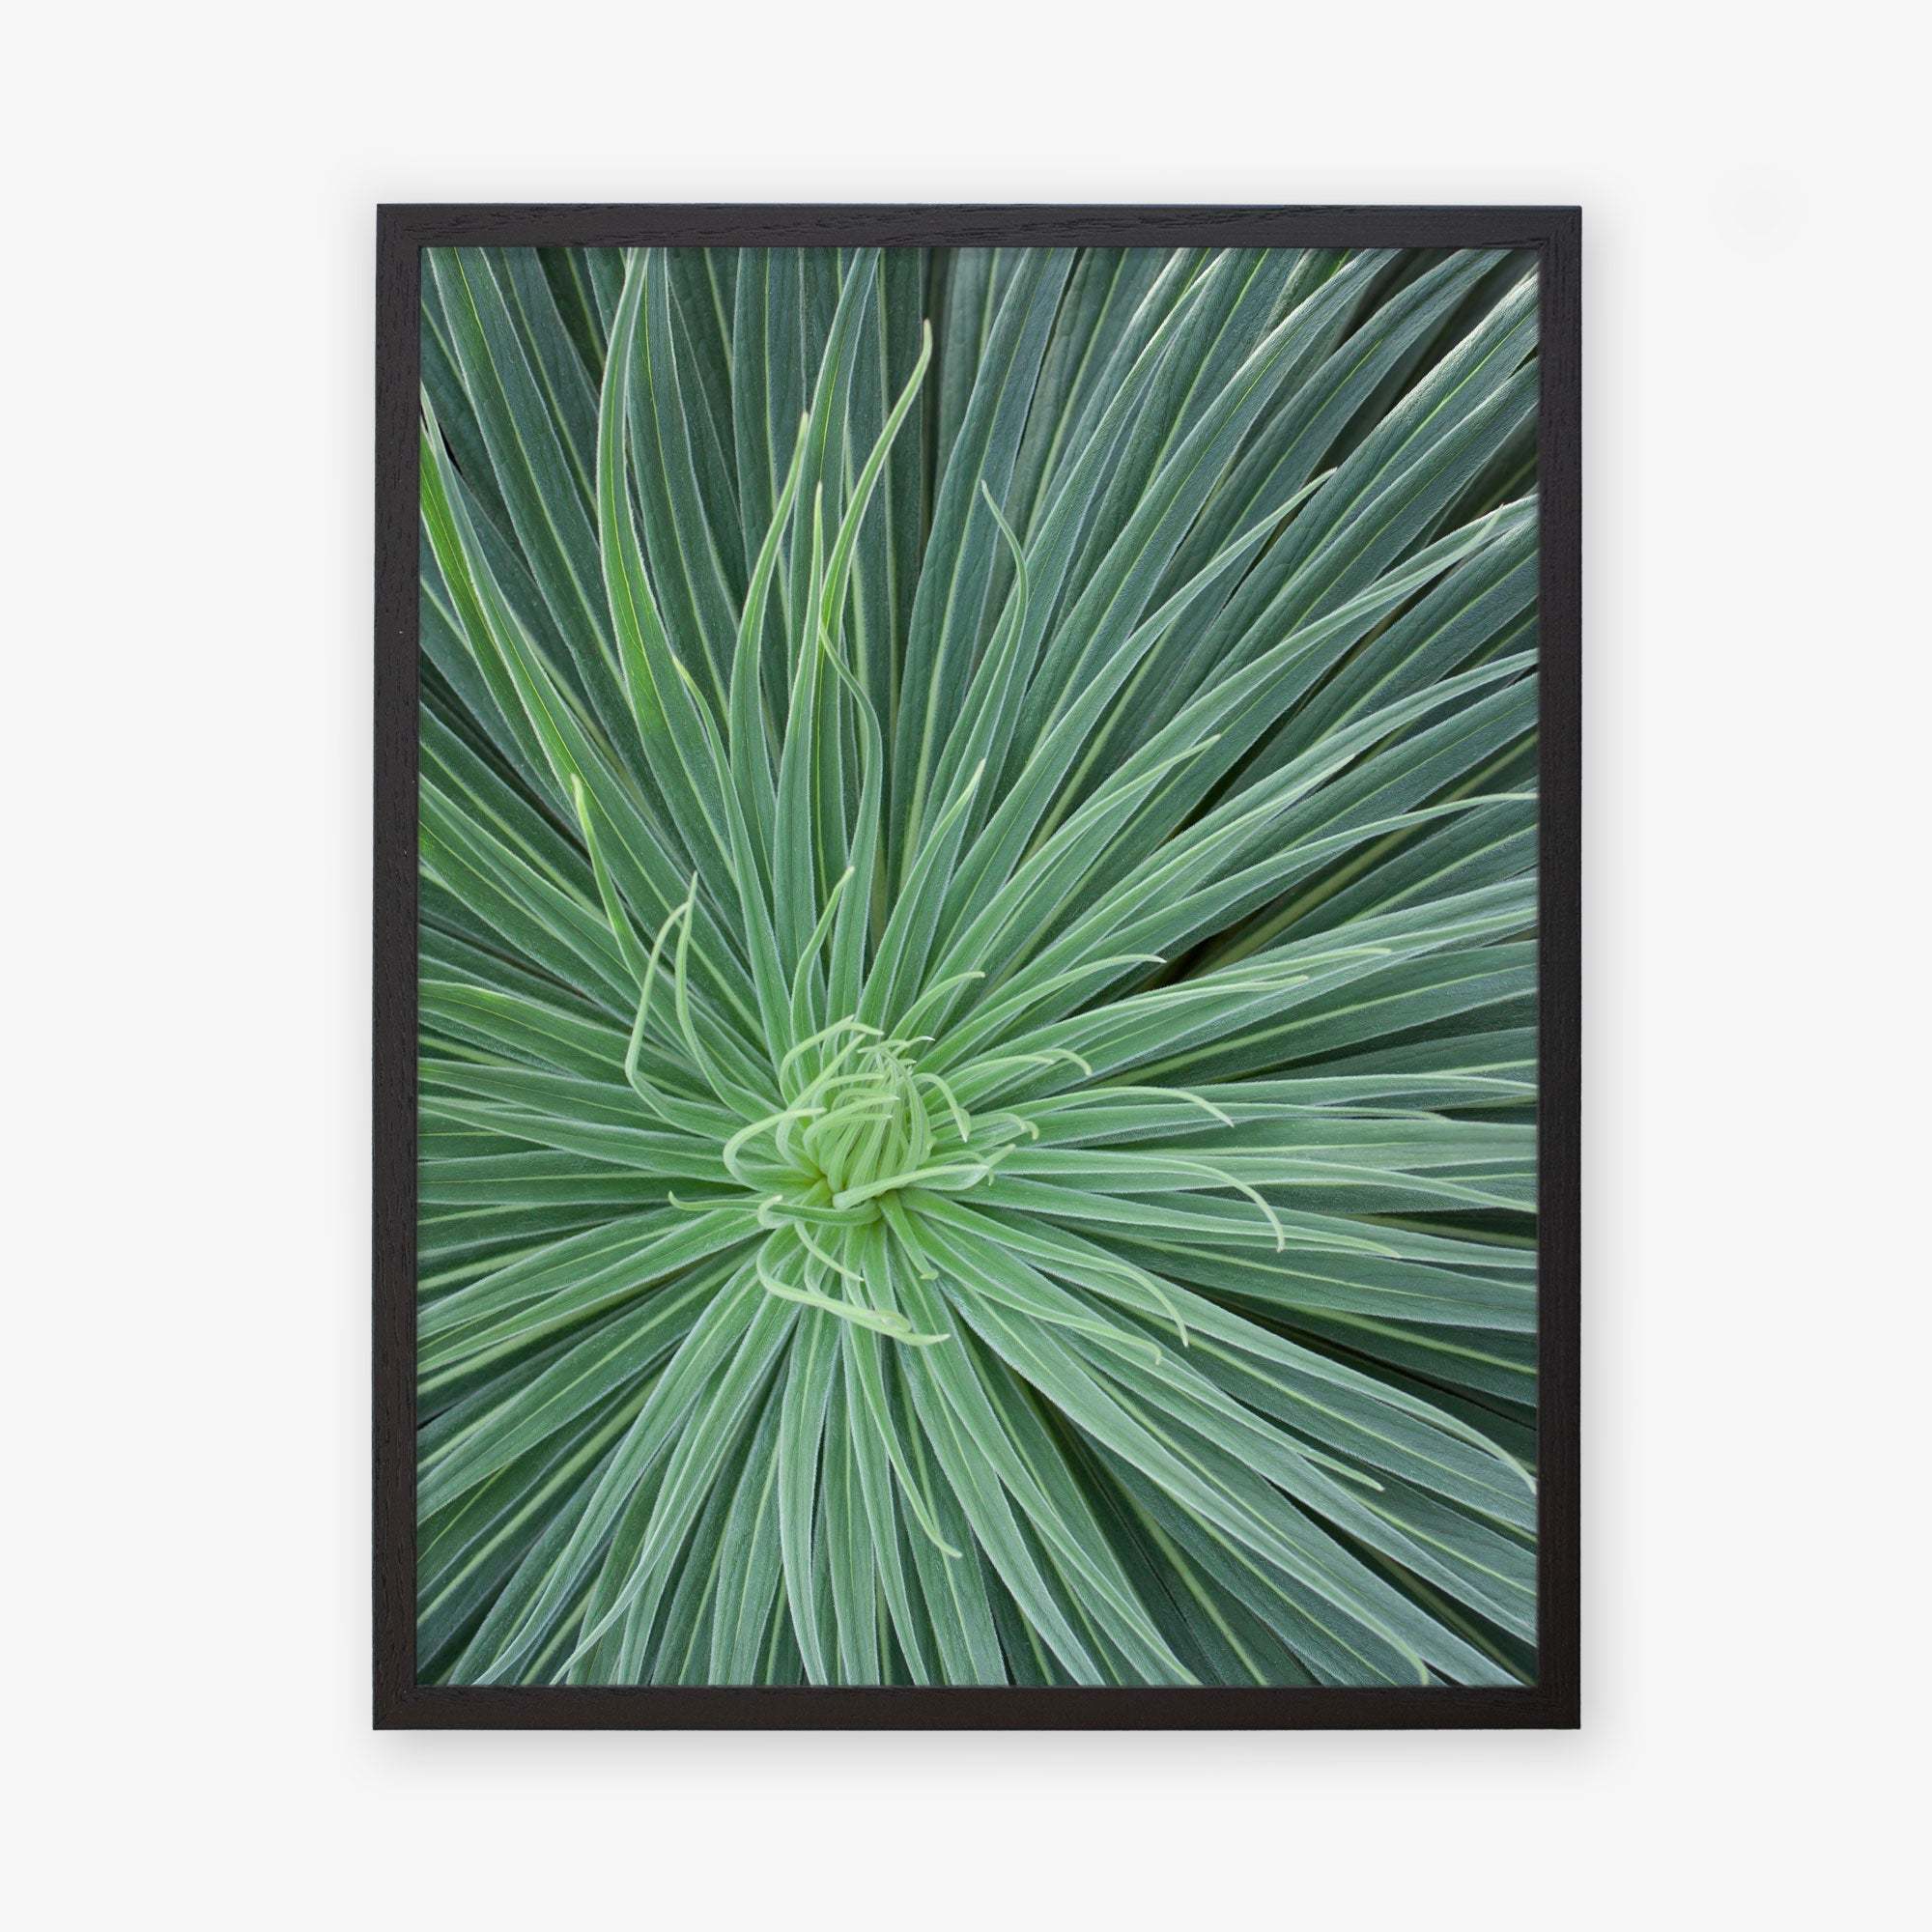 A close-up framed photo of a Green Botanical Wall Art &#39;Desert Fireworks II&#39; agave plant, printed on archival photographic paper, showing detailed needle-like leaves radiating symmetrically from the center by Offley Green.